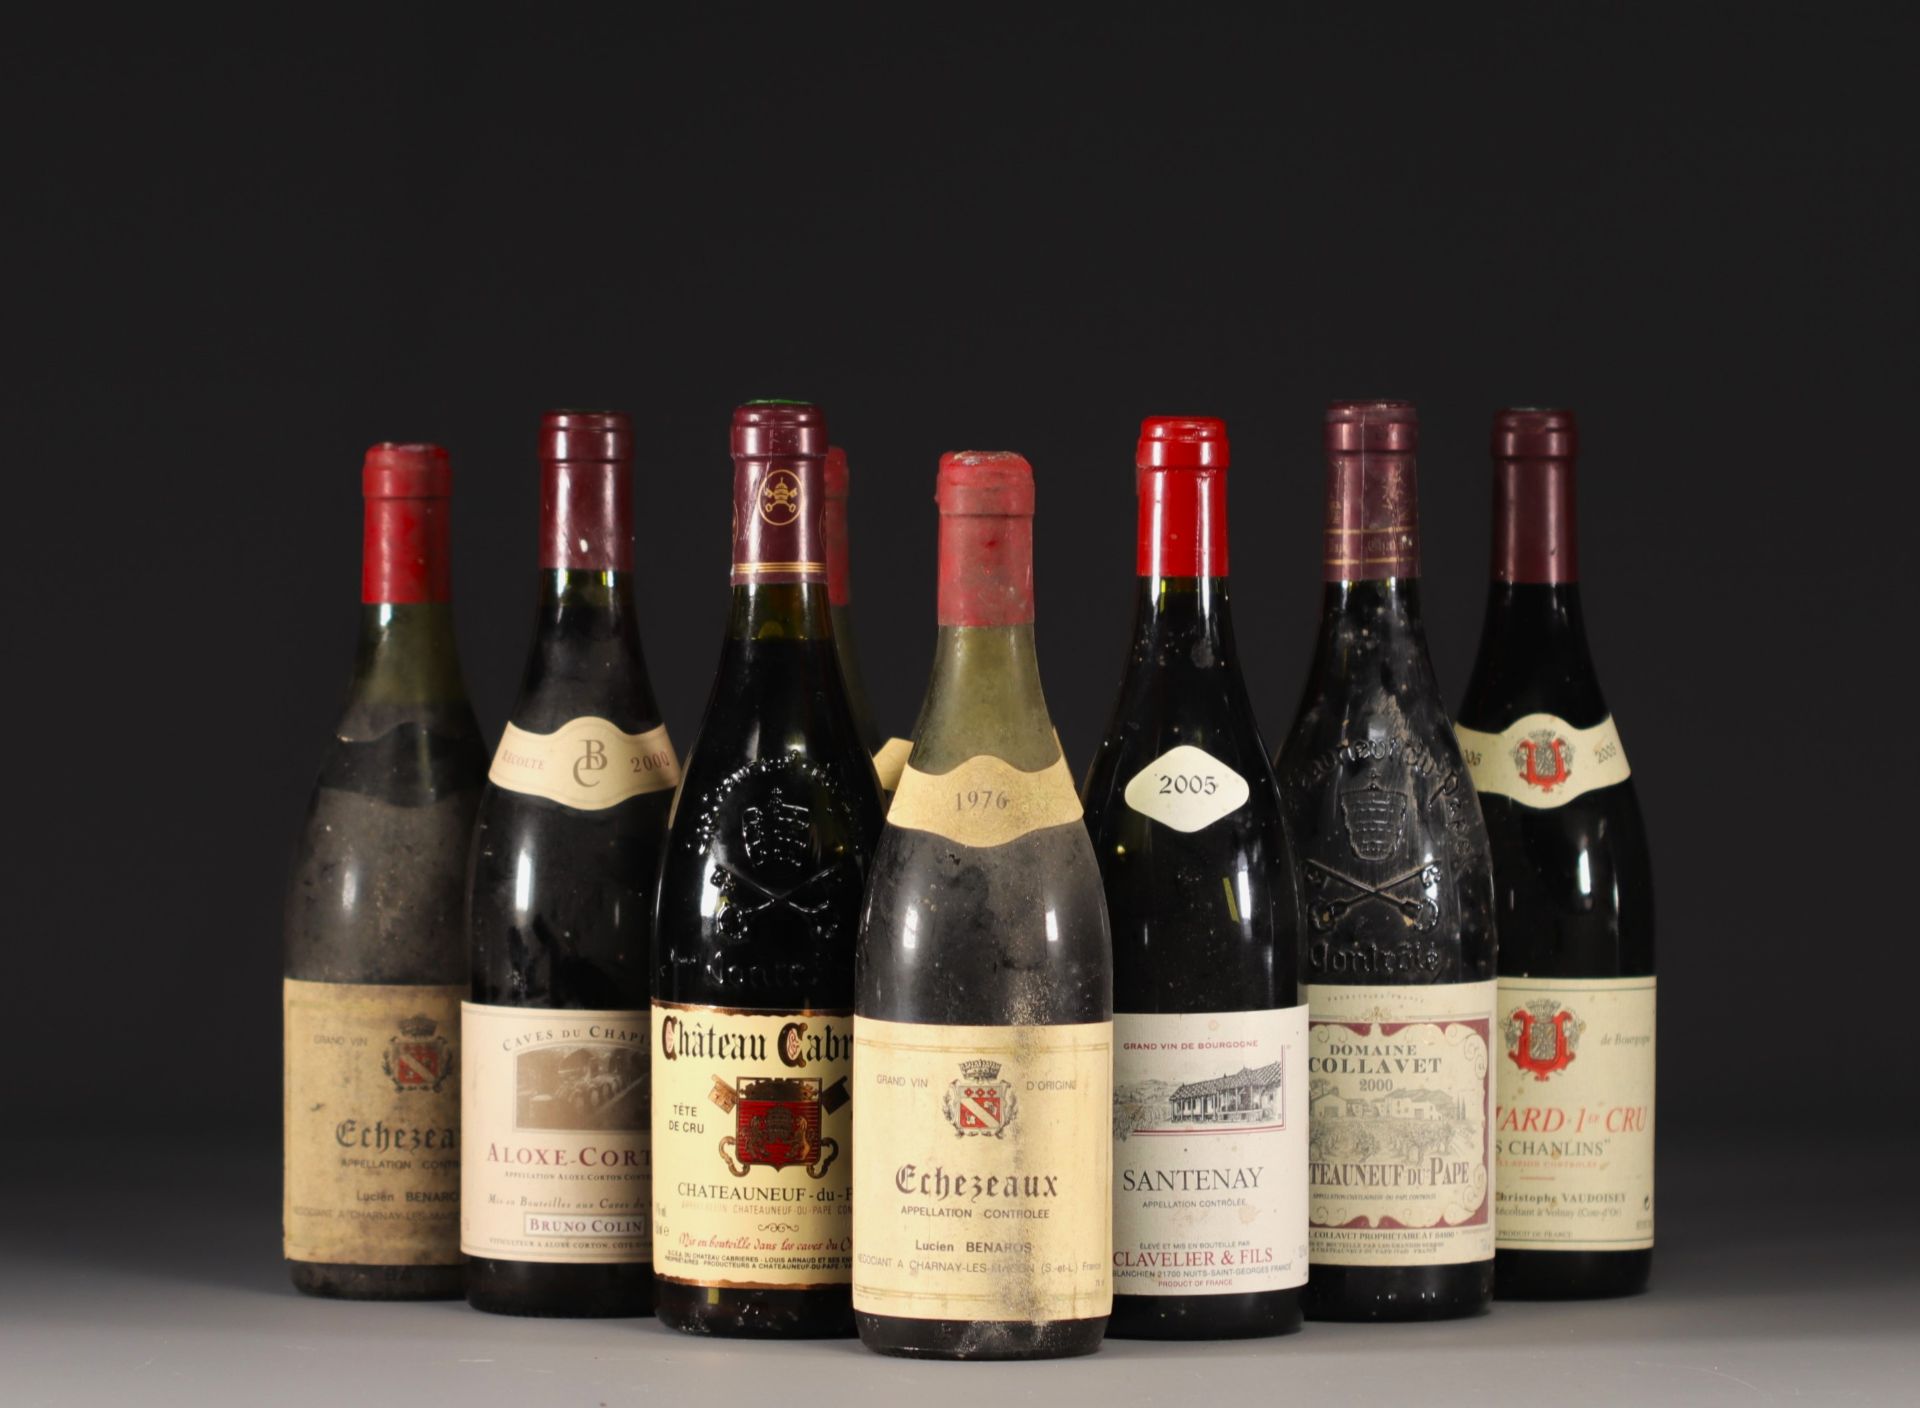 Lot of 10 bottles of various Burgundy and Chateauneuf du Pape wines.